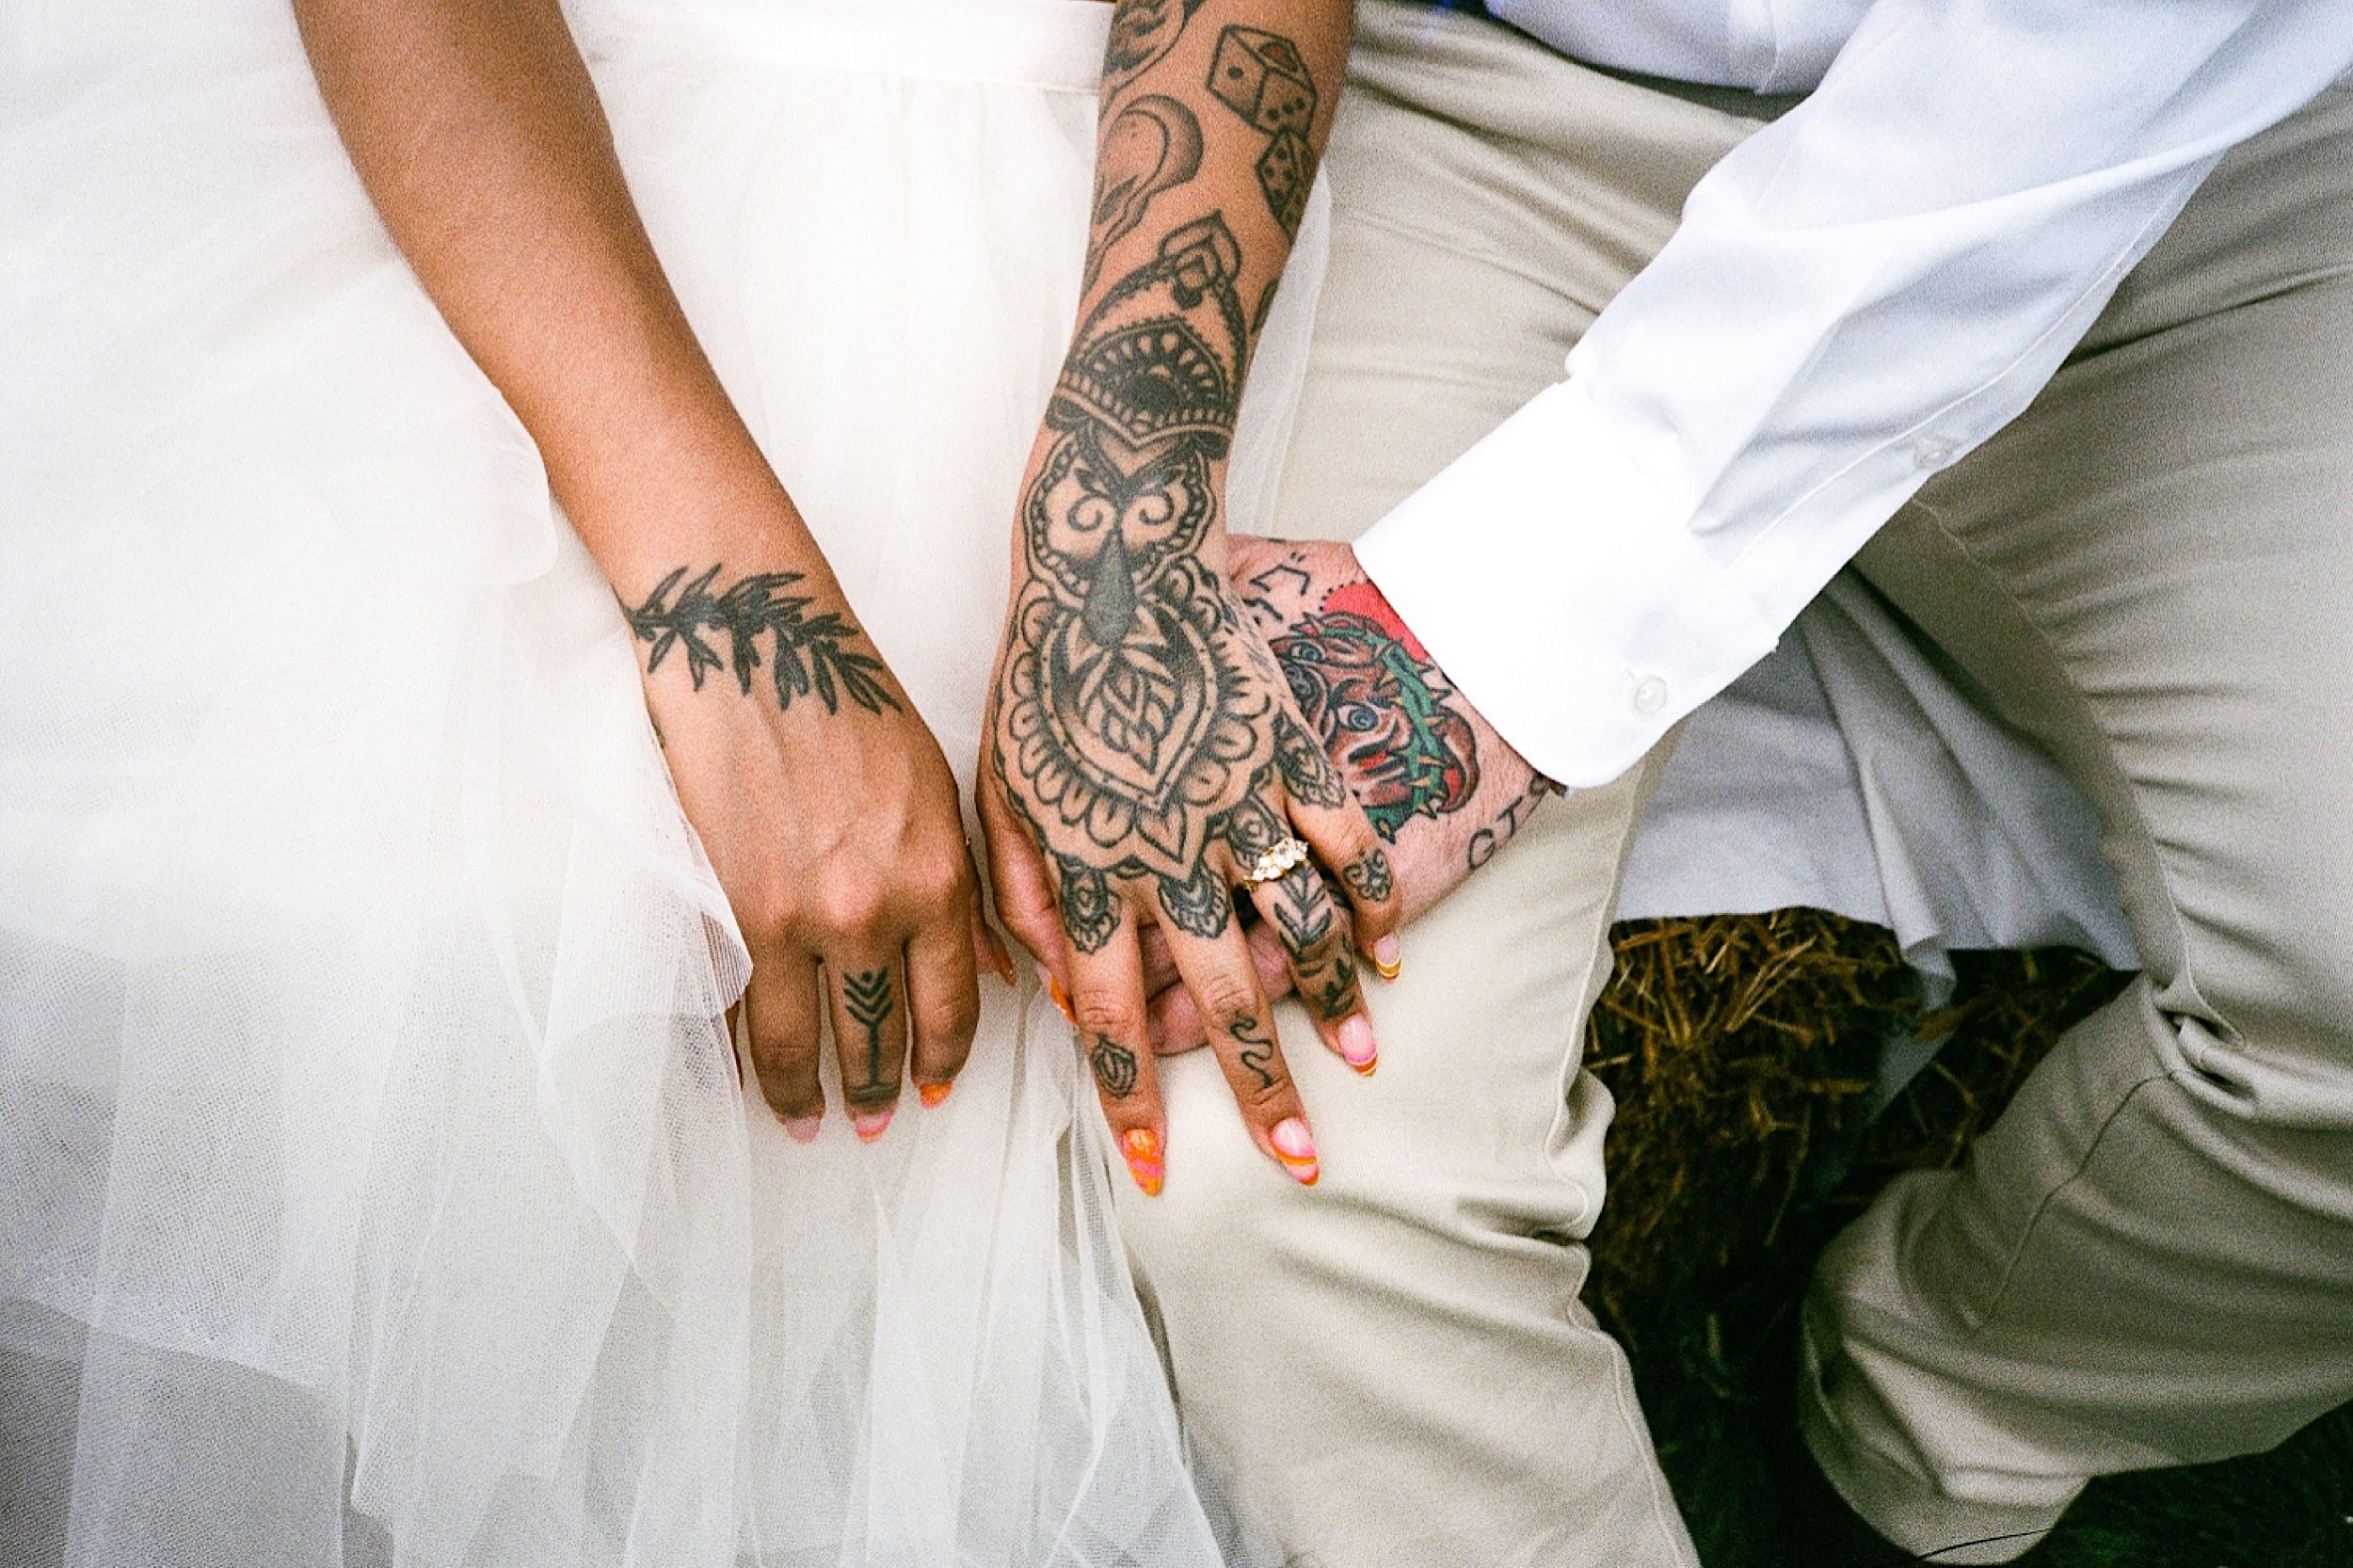 Scan05_heavily tattooed Bride and Groom holding hands.jpg